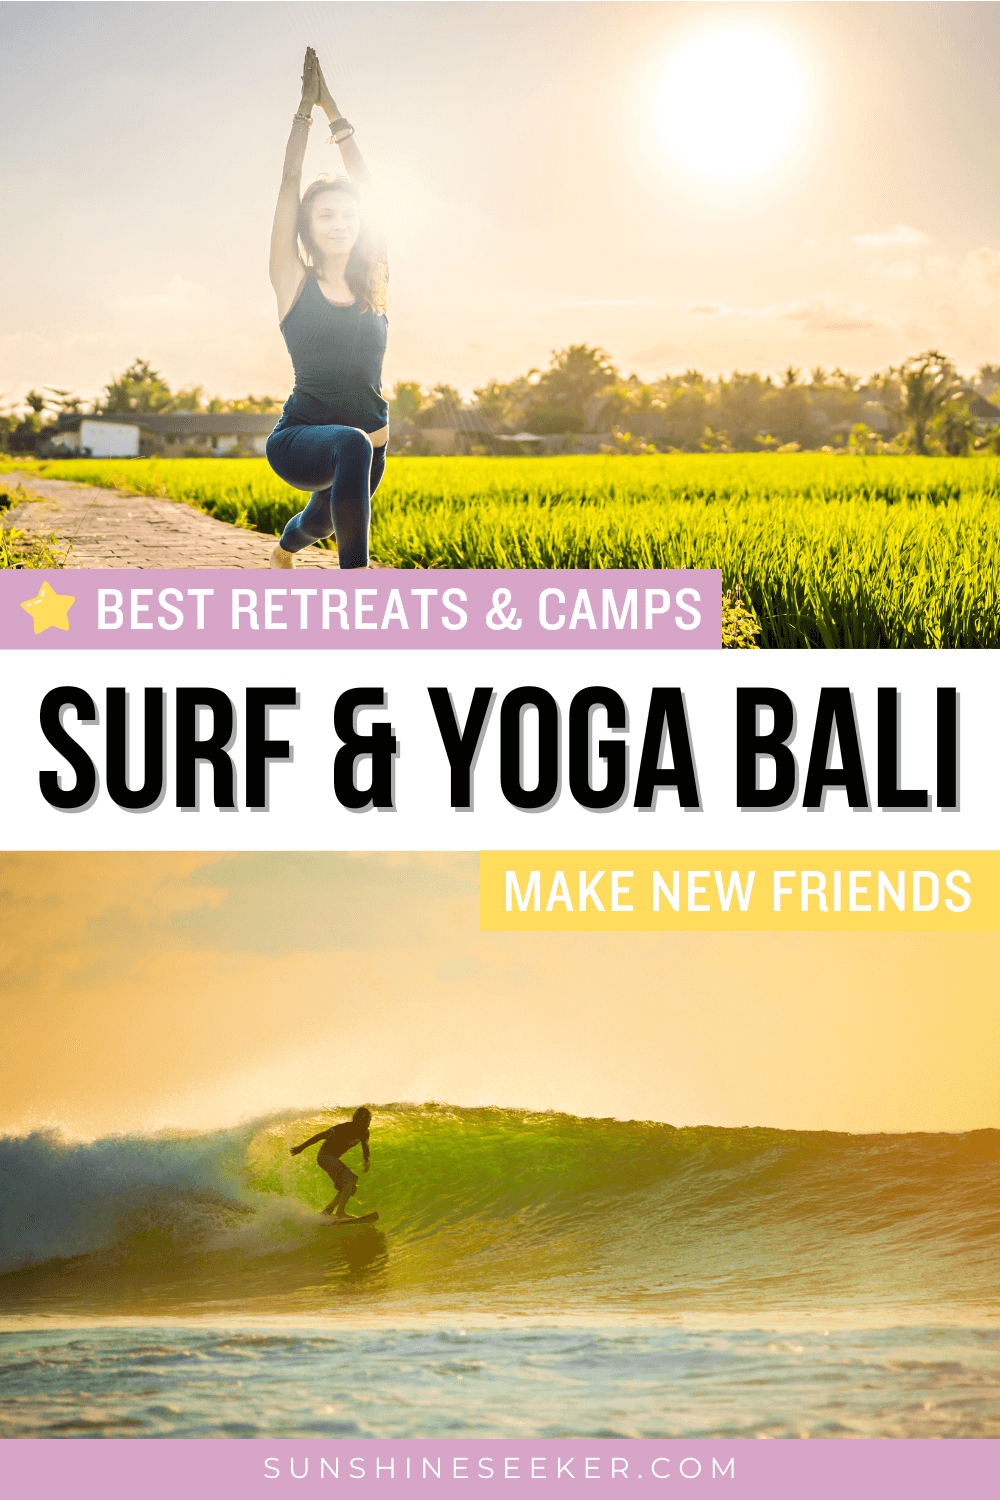 Are you looking for the best surf and yoga retreats in Bali? I have compiled a list of surf and yoga retreats and camps in Bali that caters to every level - from beginner to advanced. Bali truly is the perfect place to learn to surf and practice yoga!